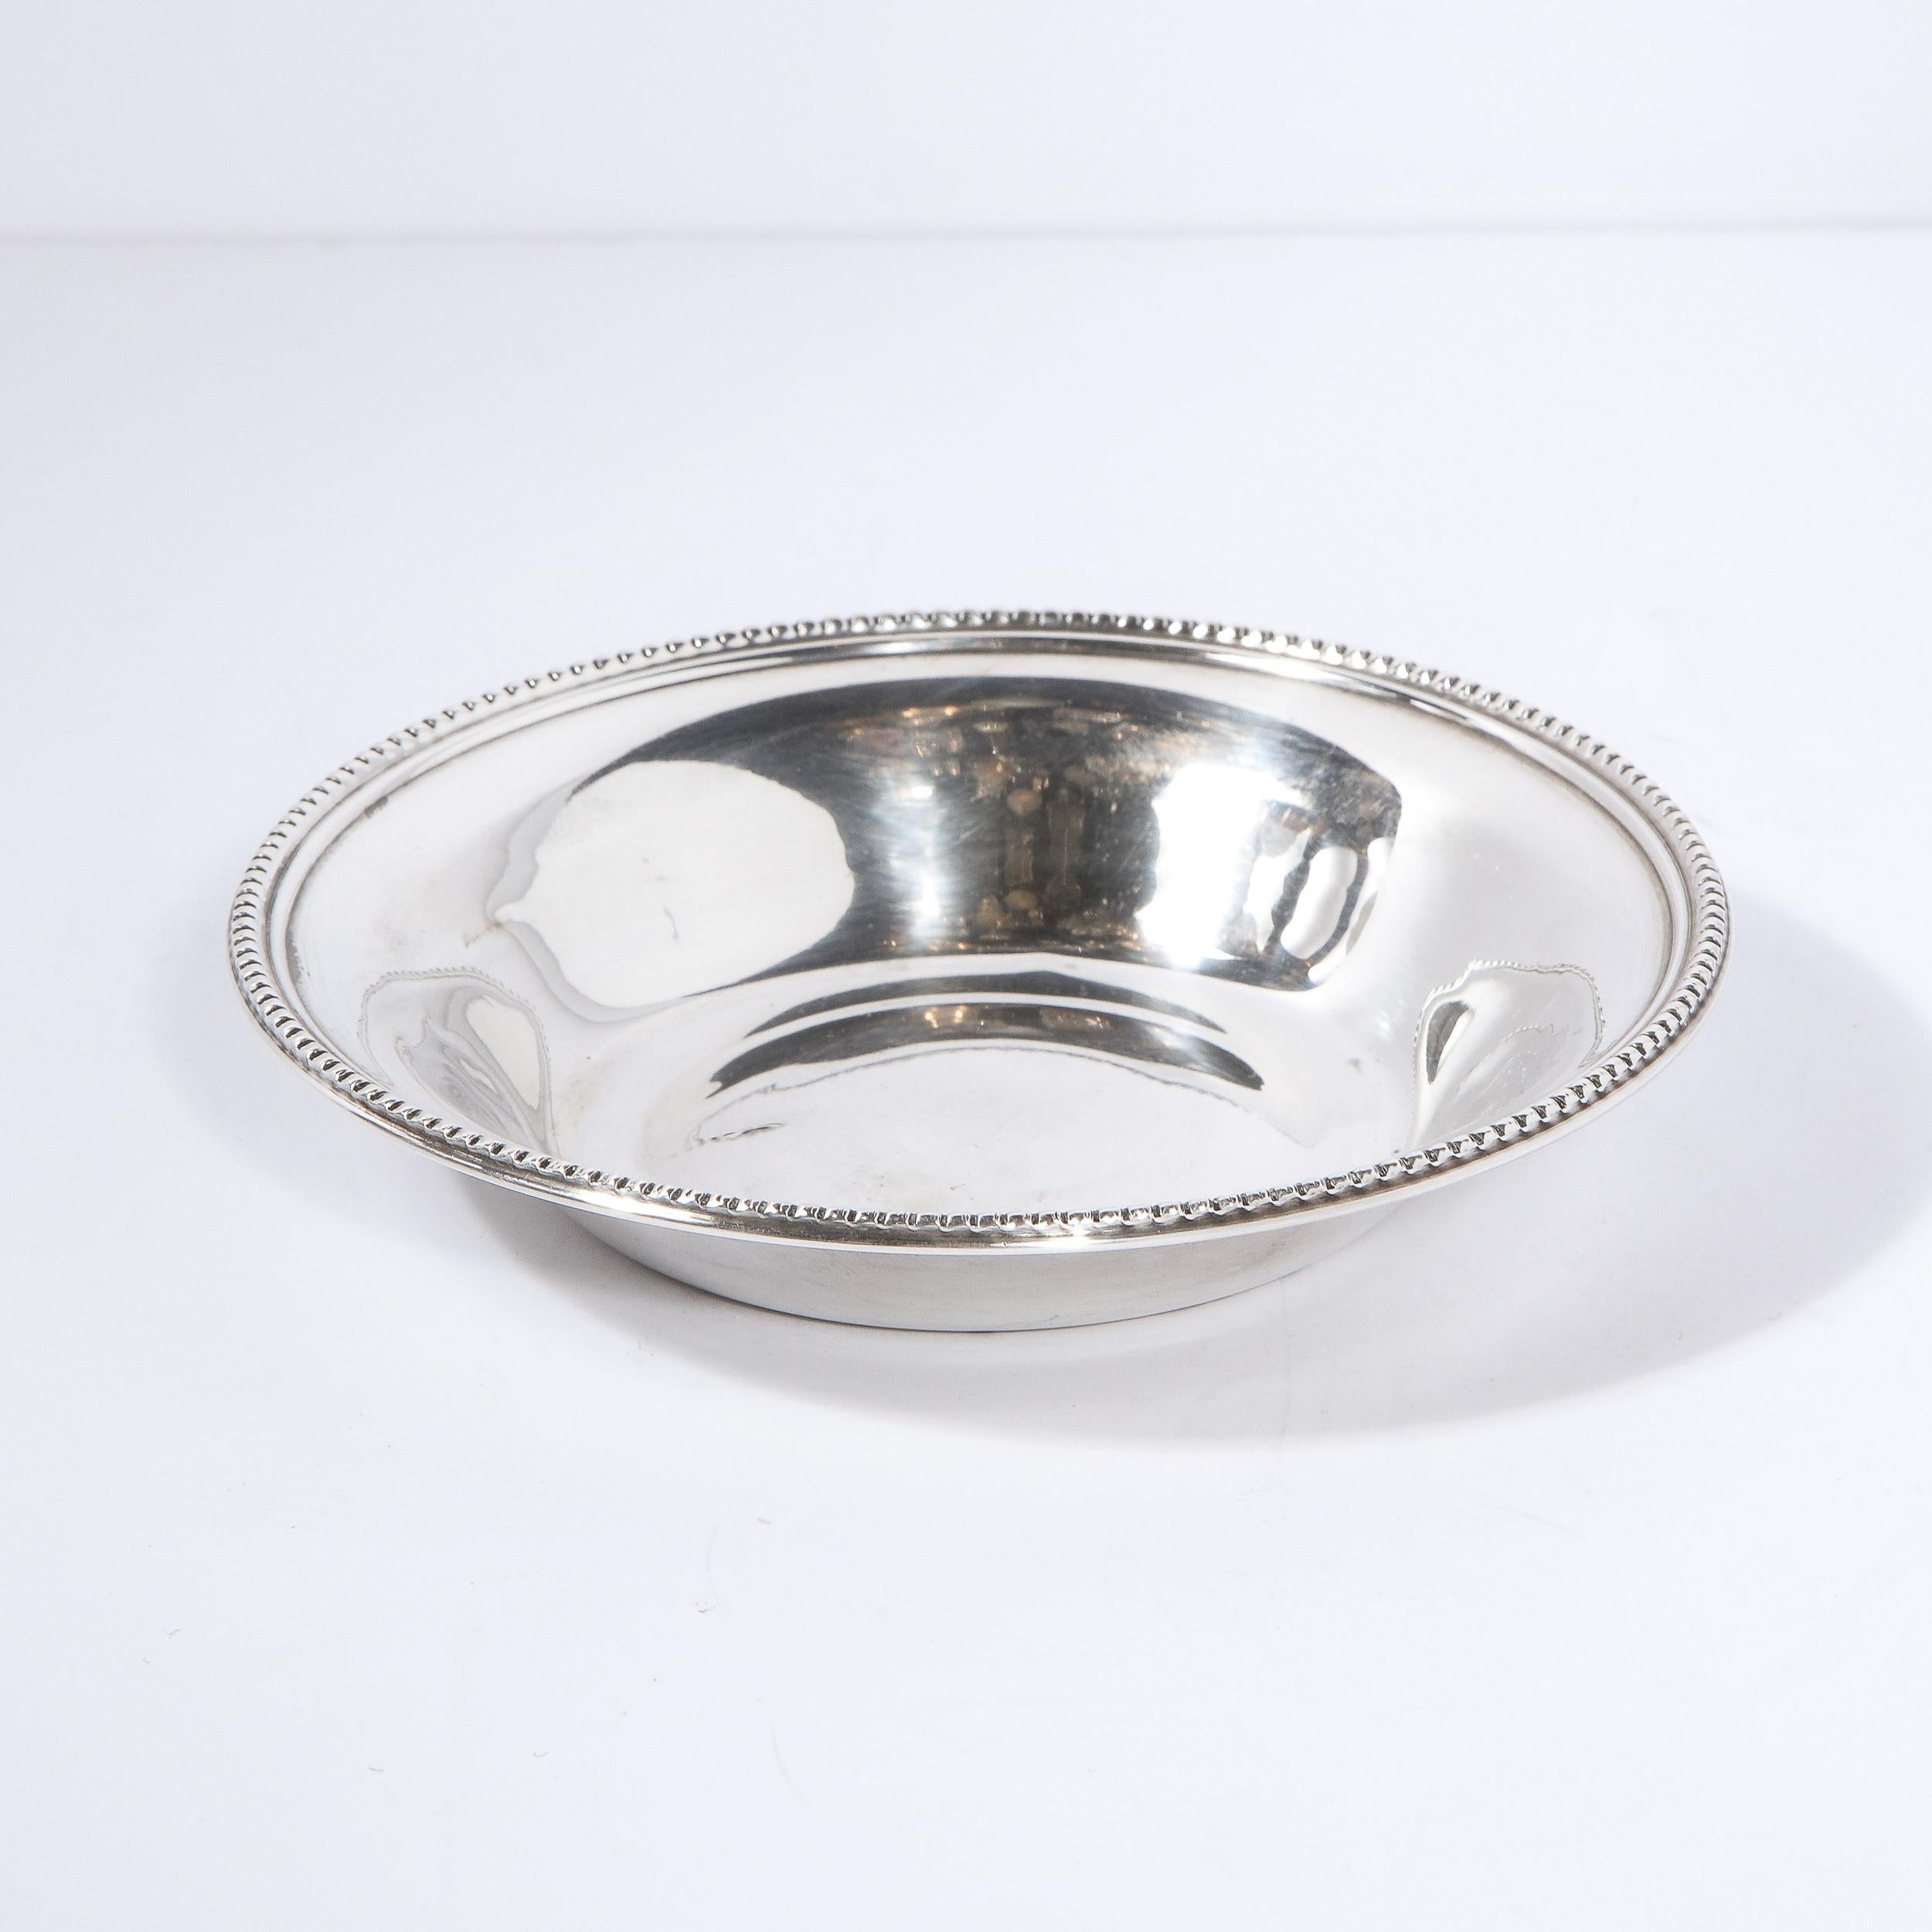 This stunning modernist decorative bowl was realized by the esteemed maker Wallace Silversmiths. It offers an austere forms with gently sloped sides; a circular base; and a beaded border with alternating raised and depressed streamlined forms